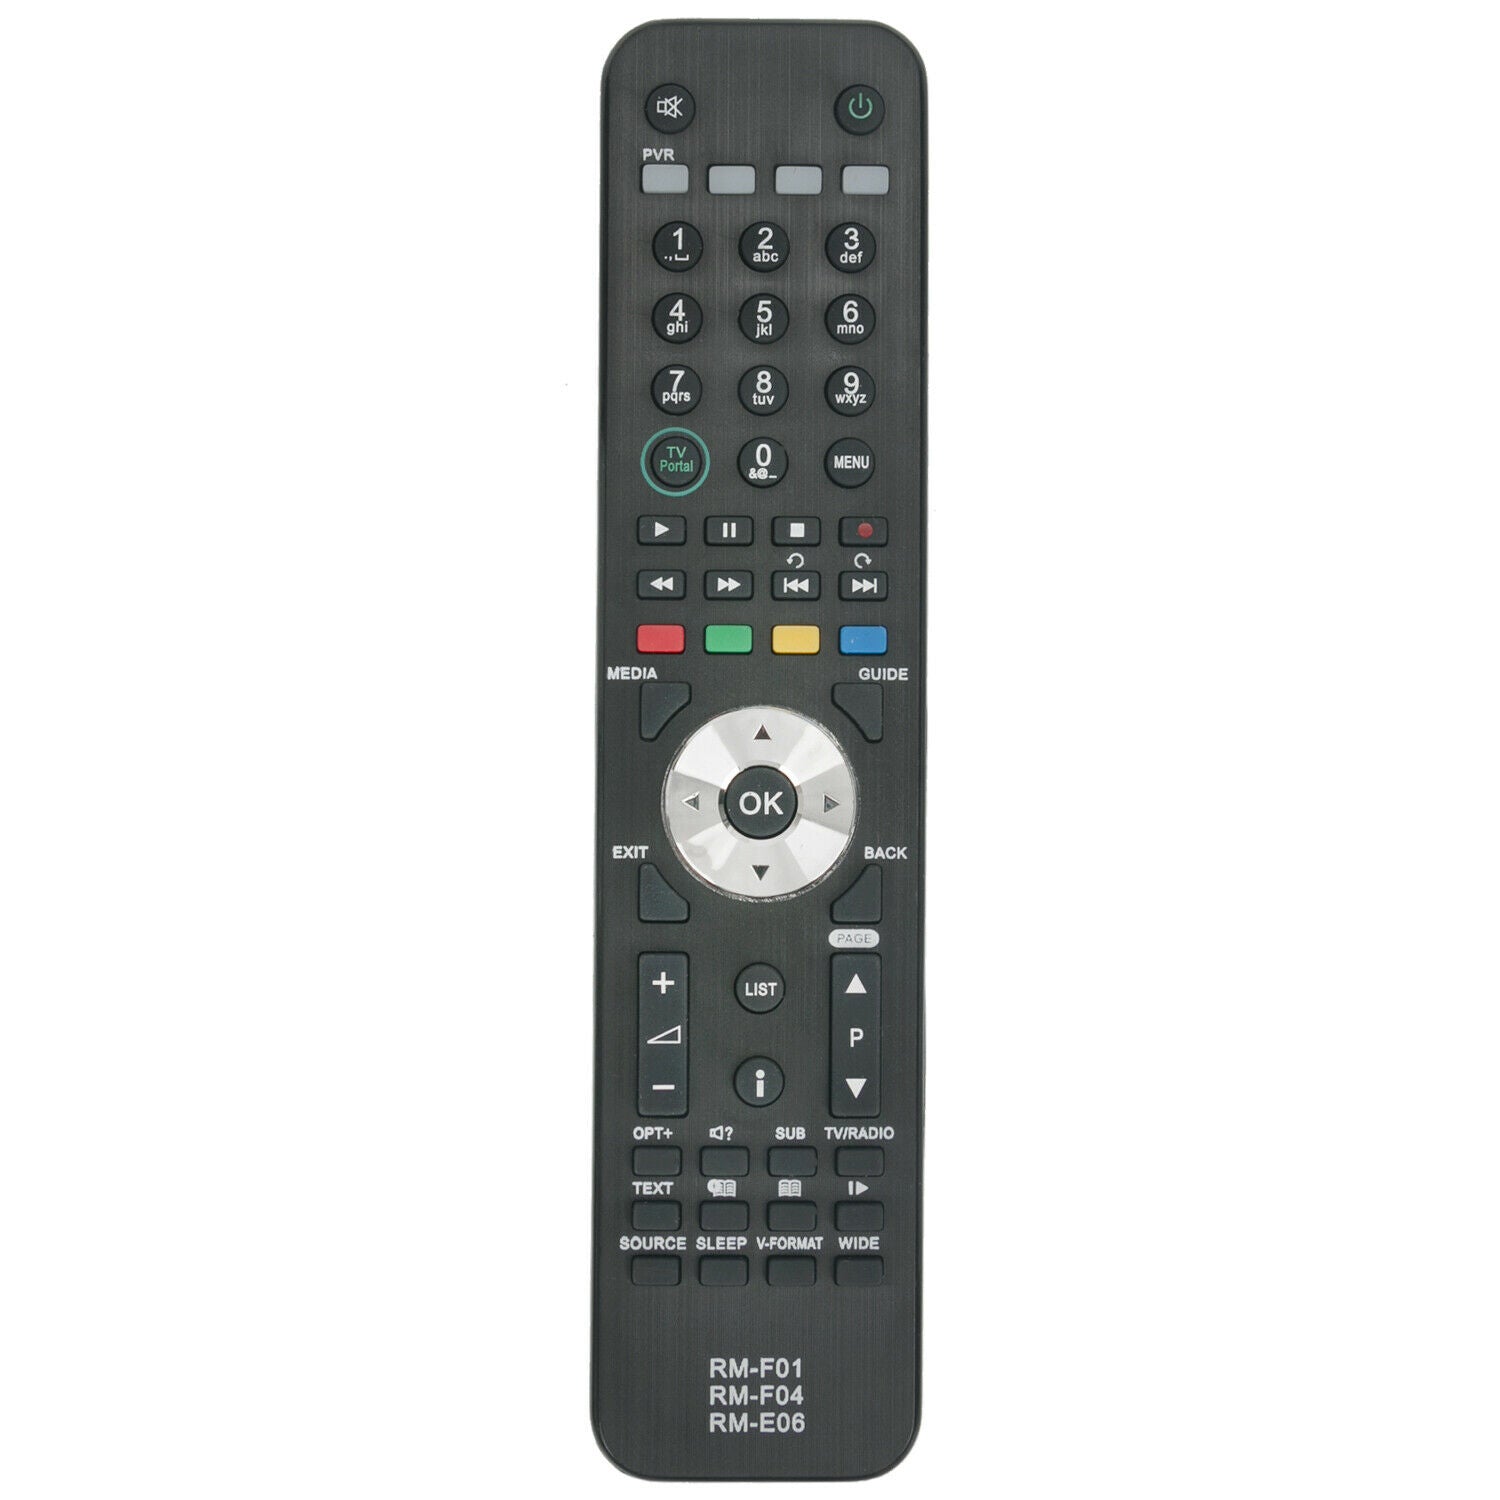 RM-F01 RM-F04 RM-E06 Remote Replacement for Humax Foxsat HDR Freesat Box